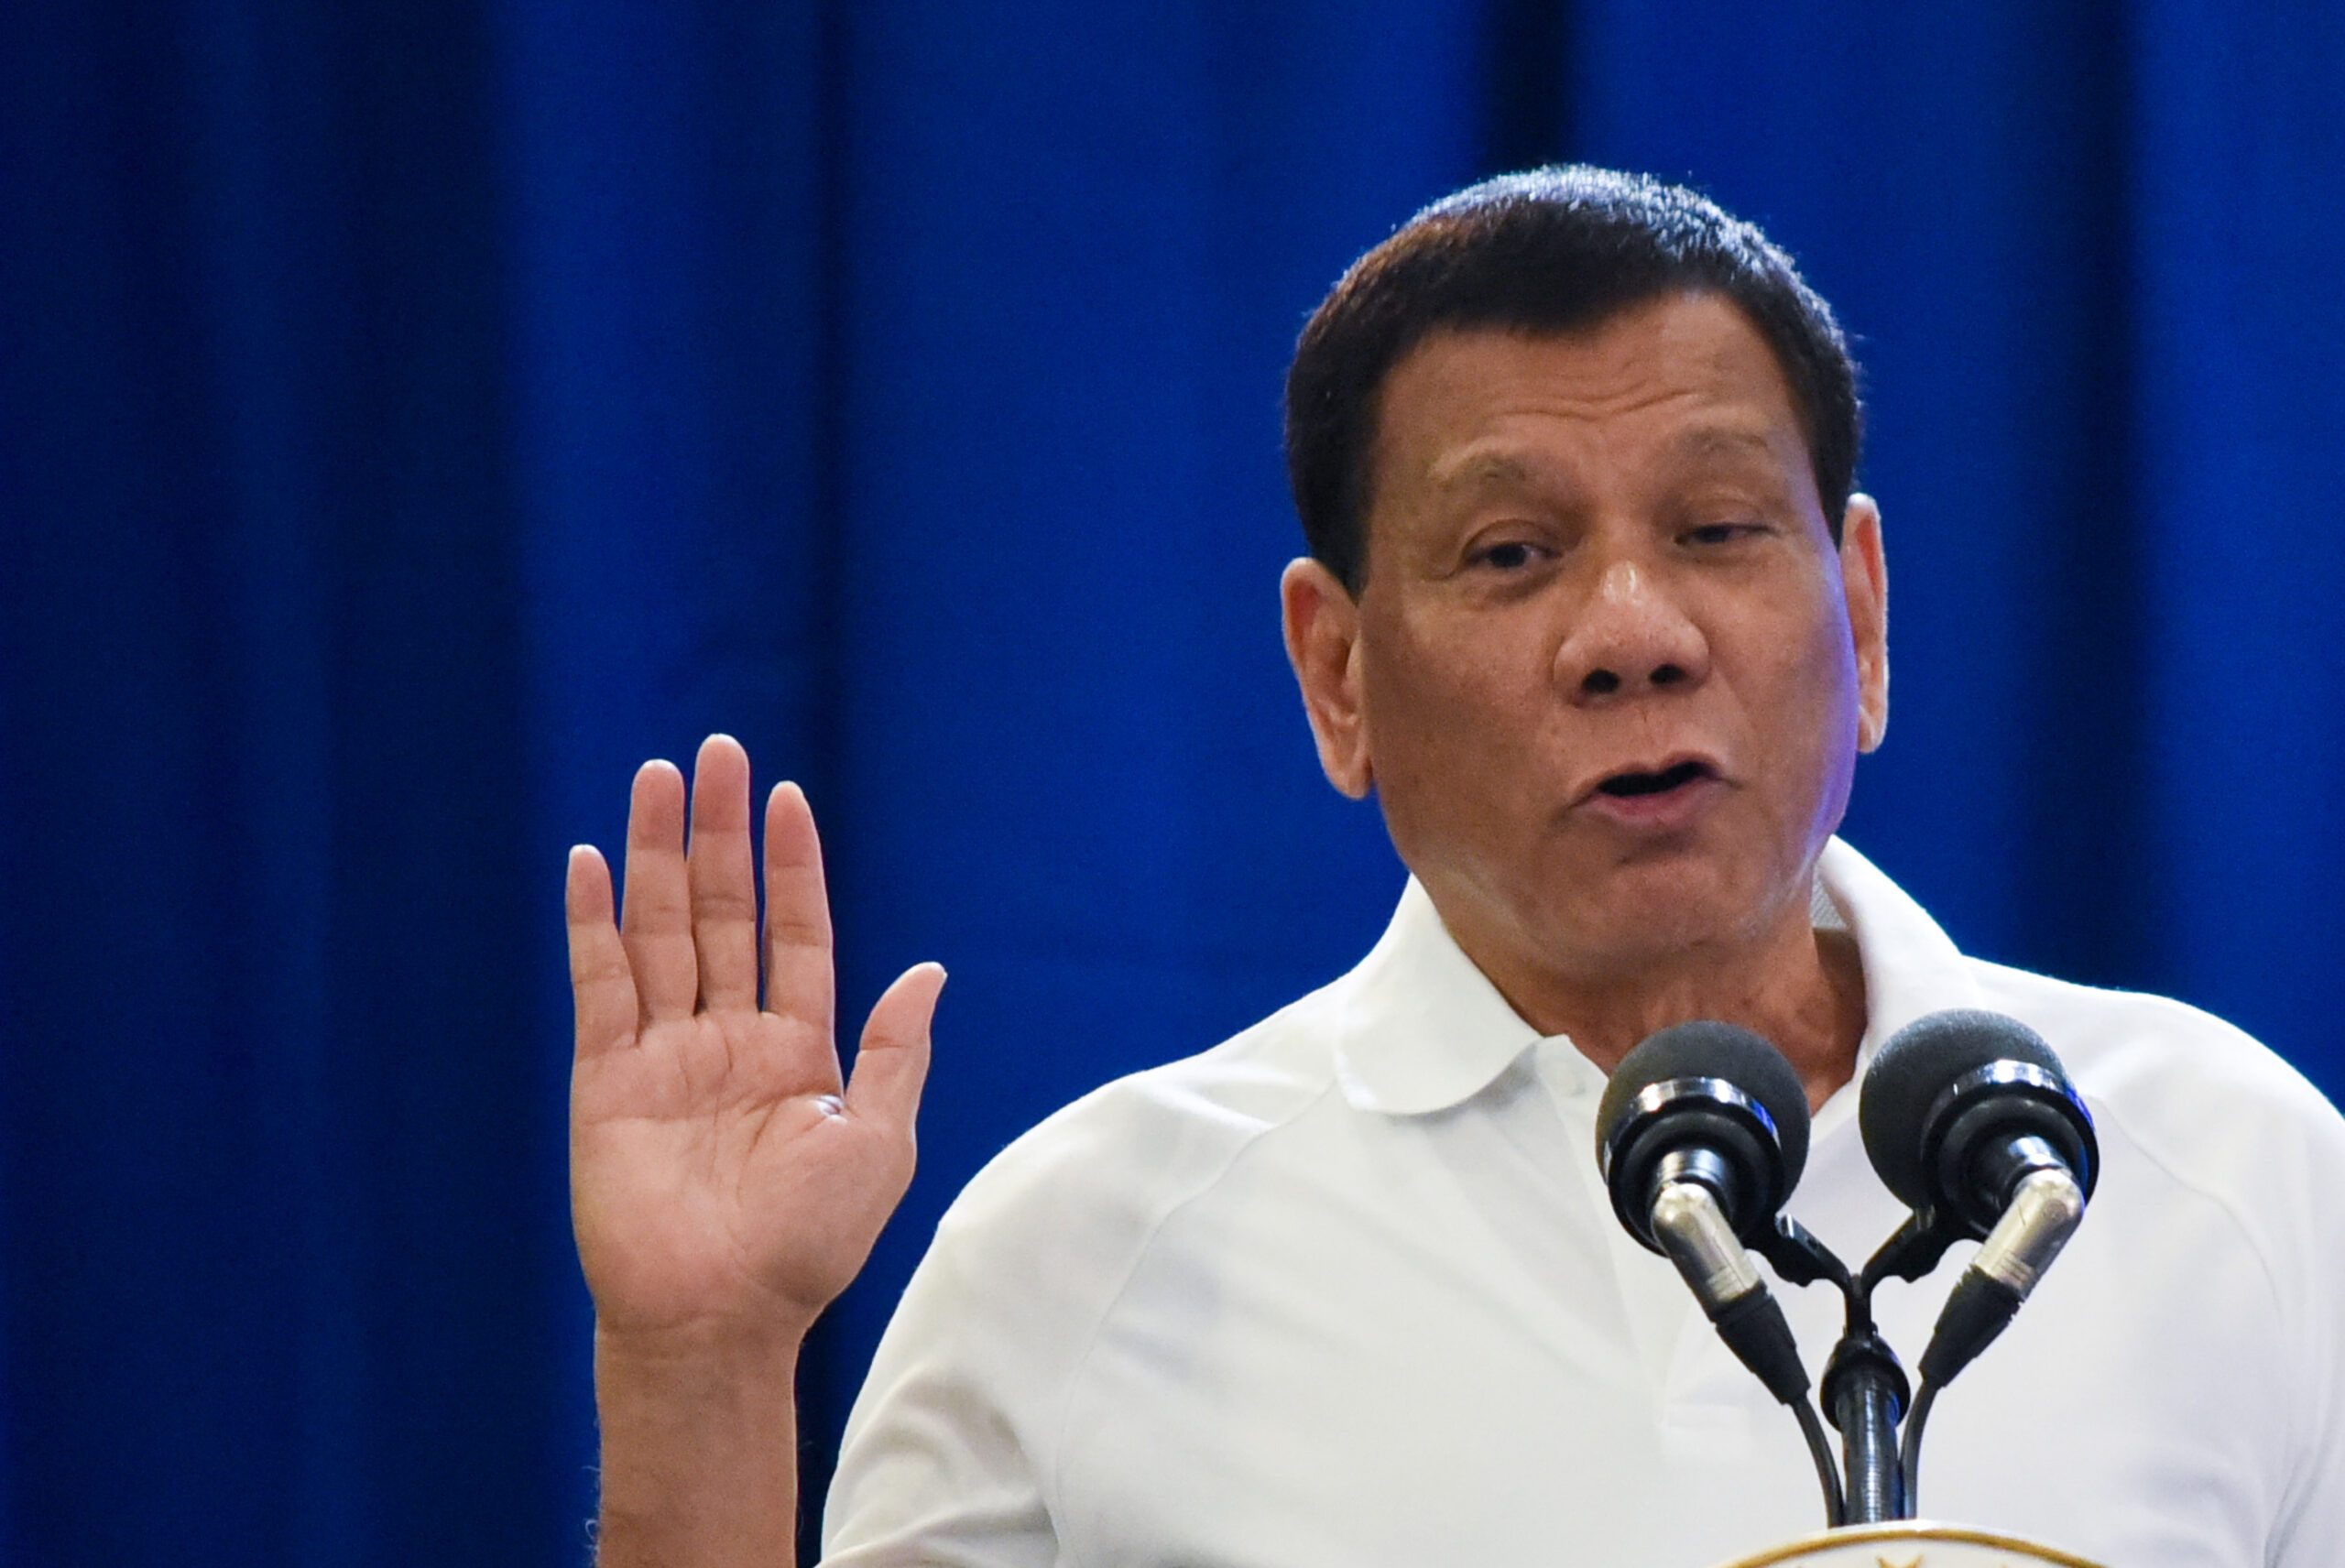 Duterte vows to build socialized housing on Mile Long property